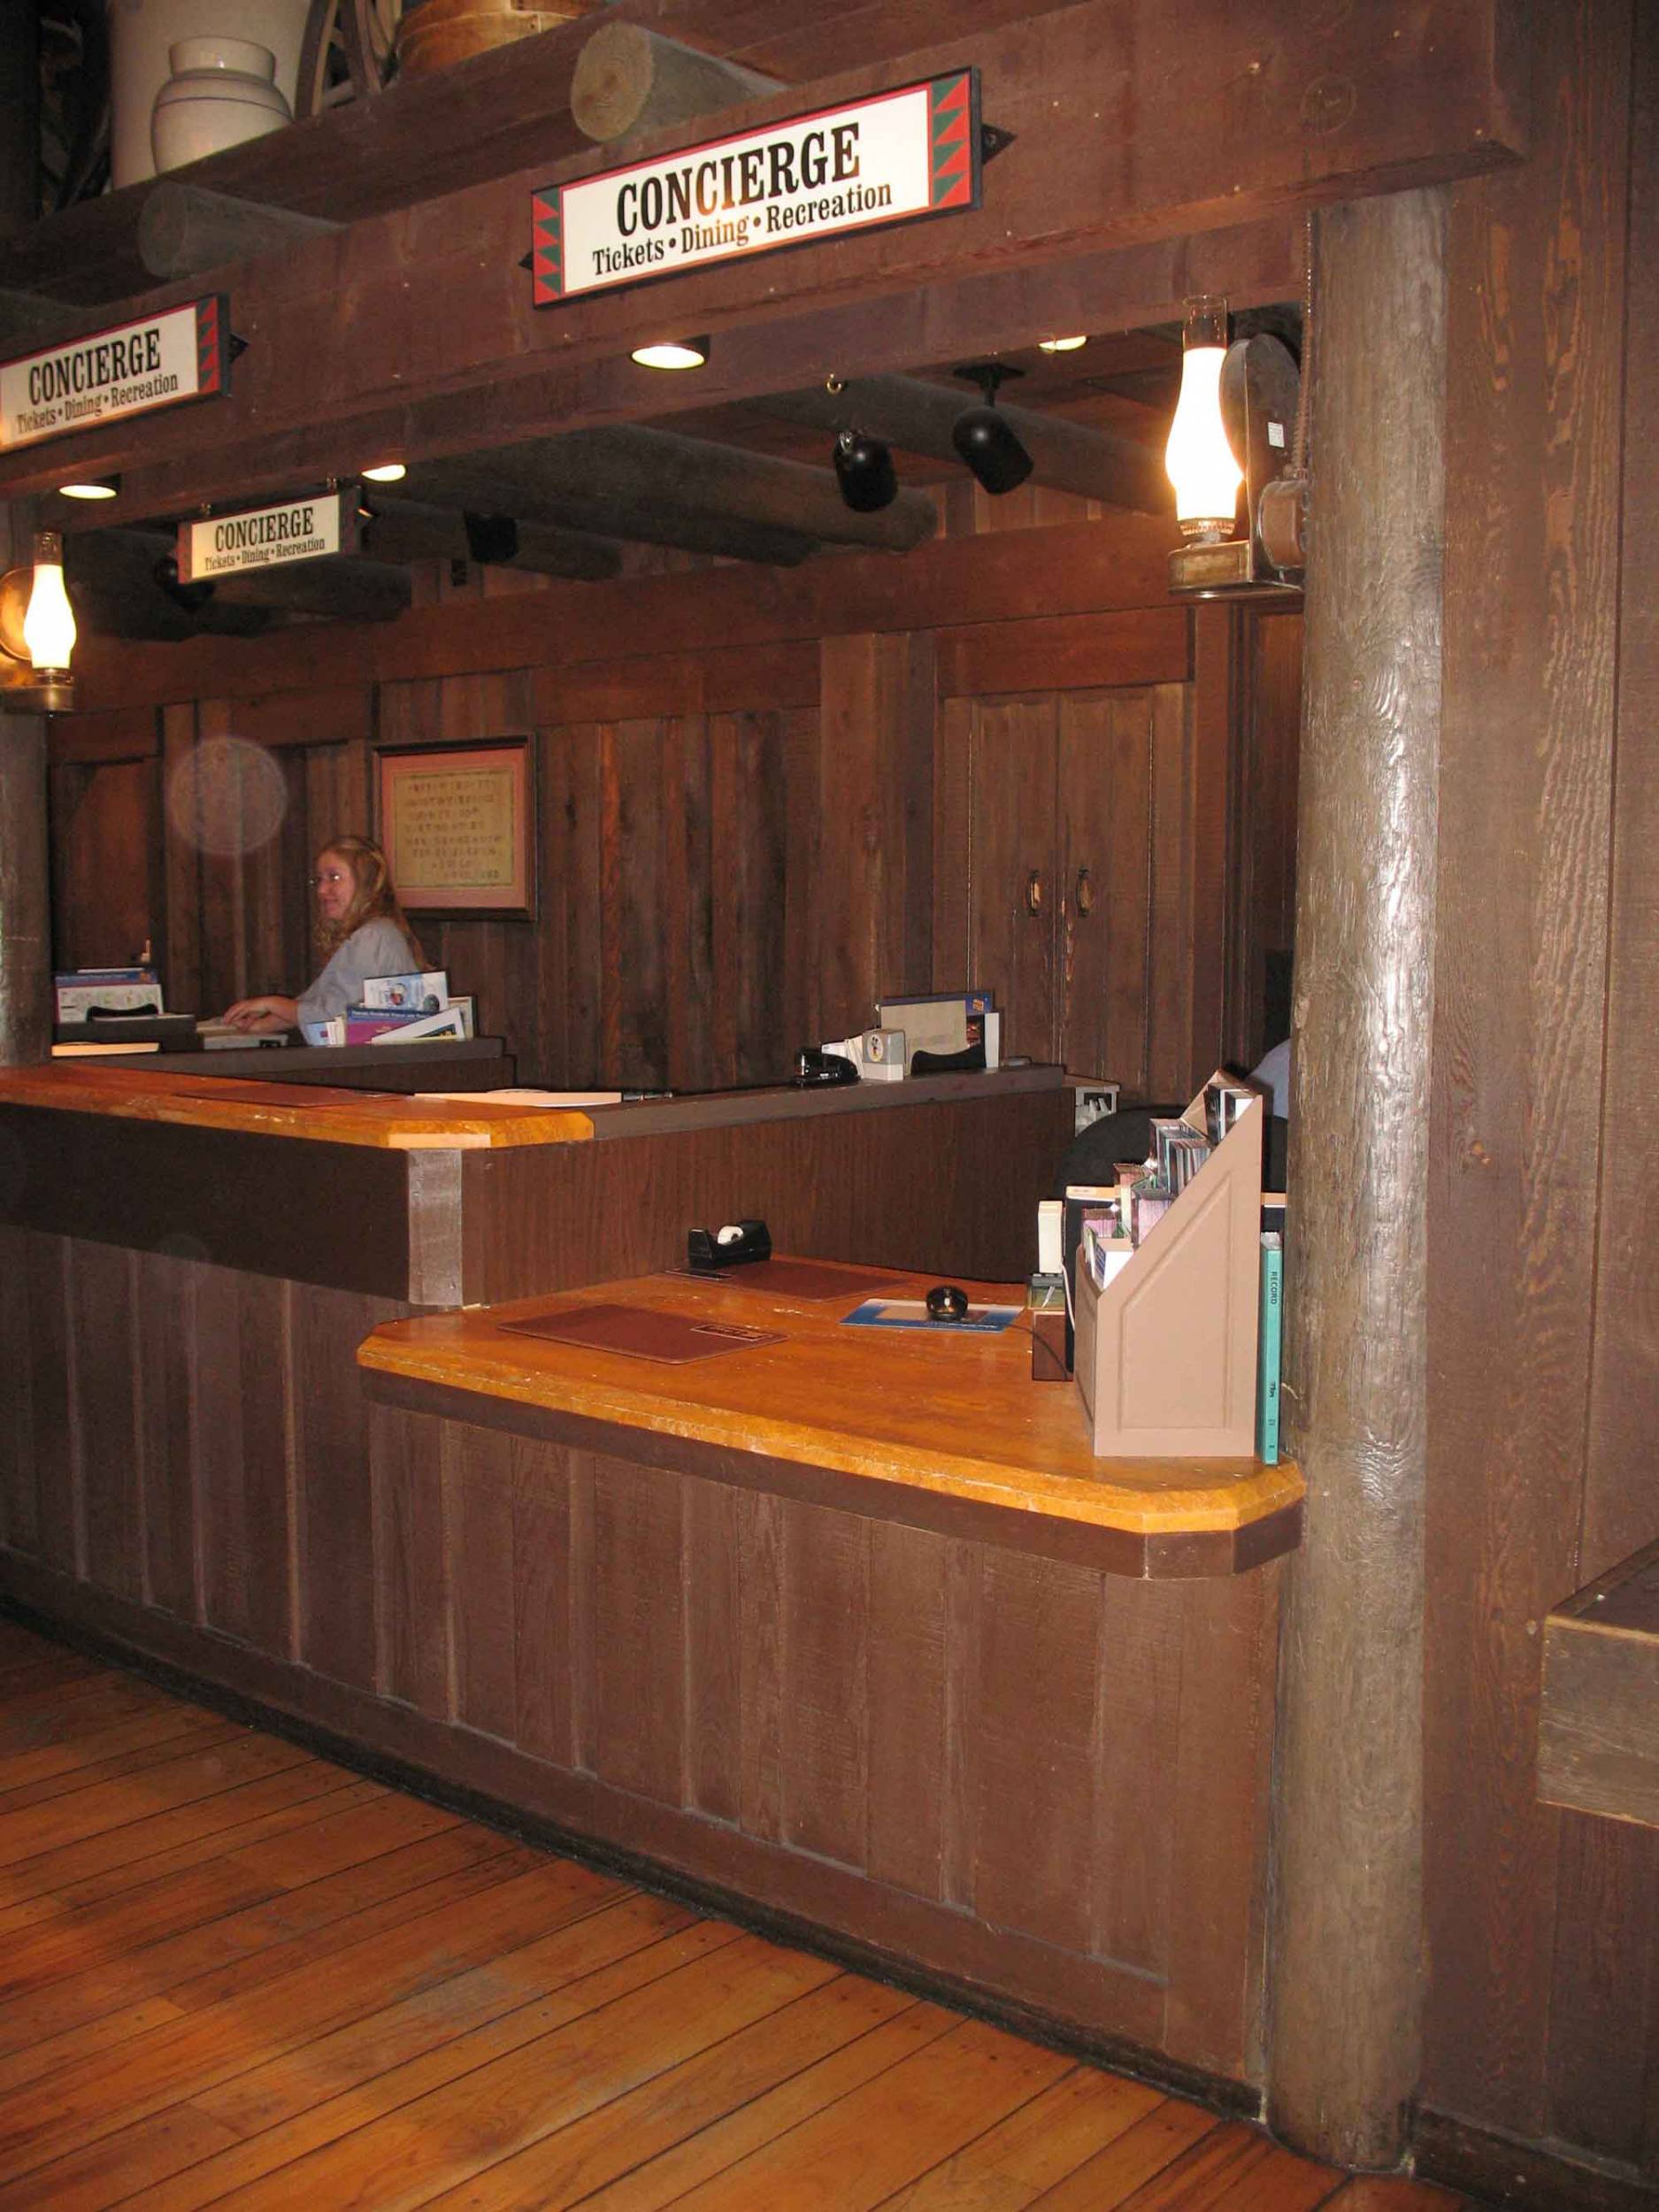 Fort Wilderness - Reception Outpost - Concierge